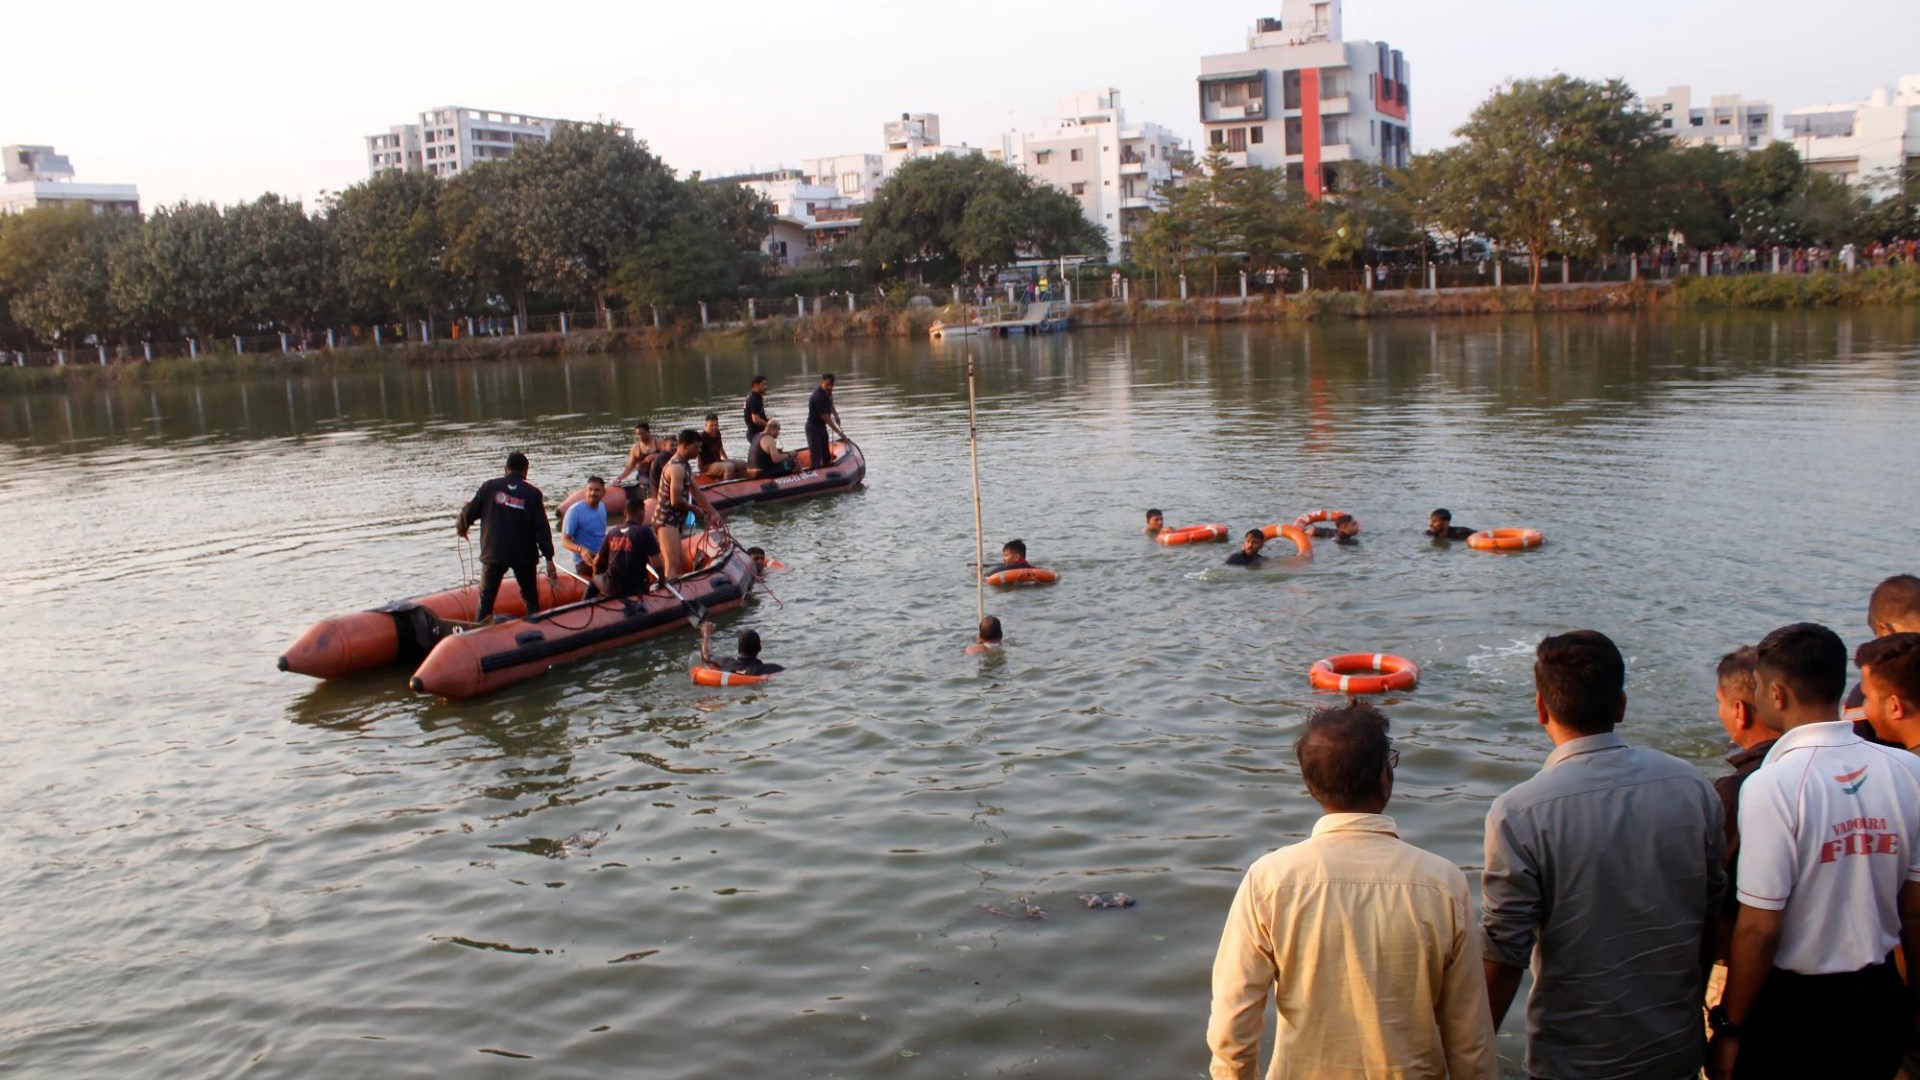 Tragedy Strikes: School Group Drowns as Rescuers Search for Survivors